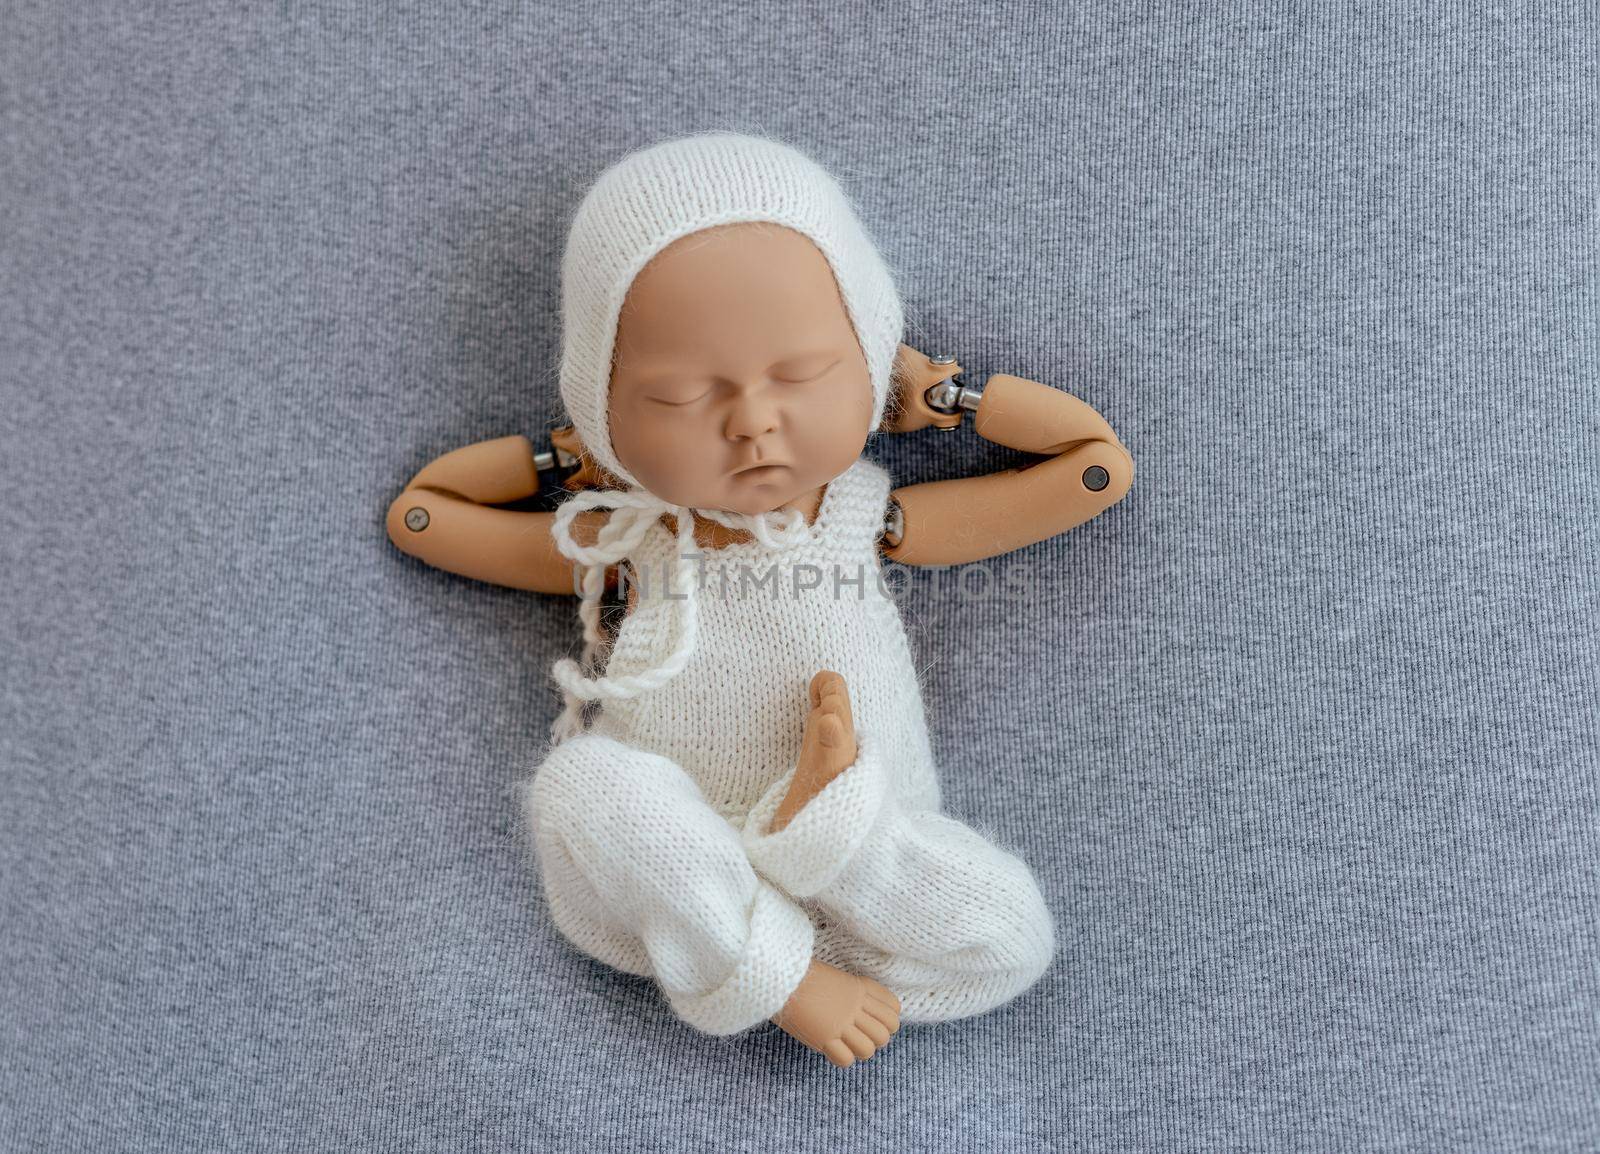 Realistic doll mannequin of newborn baby for posing training photographer practice